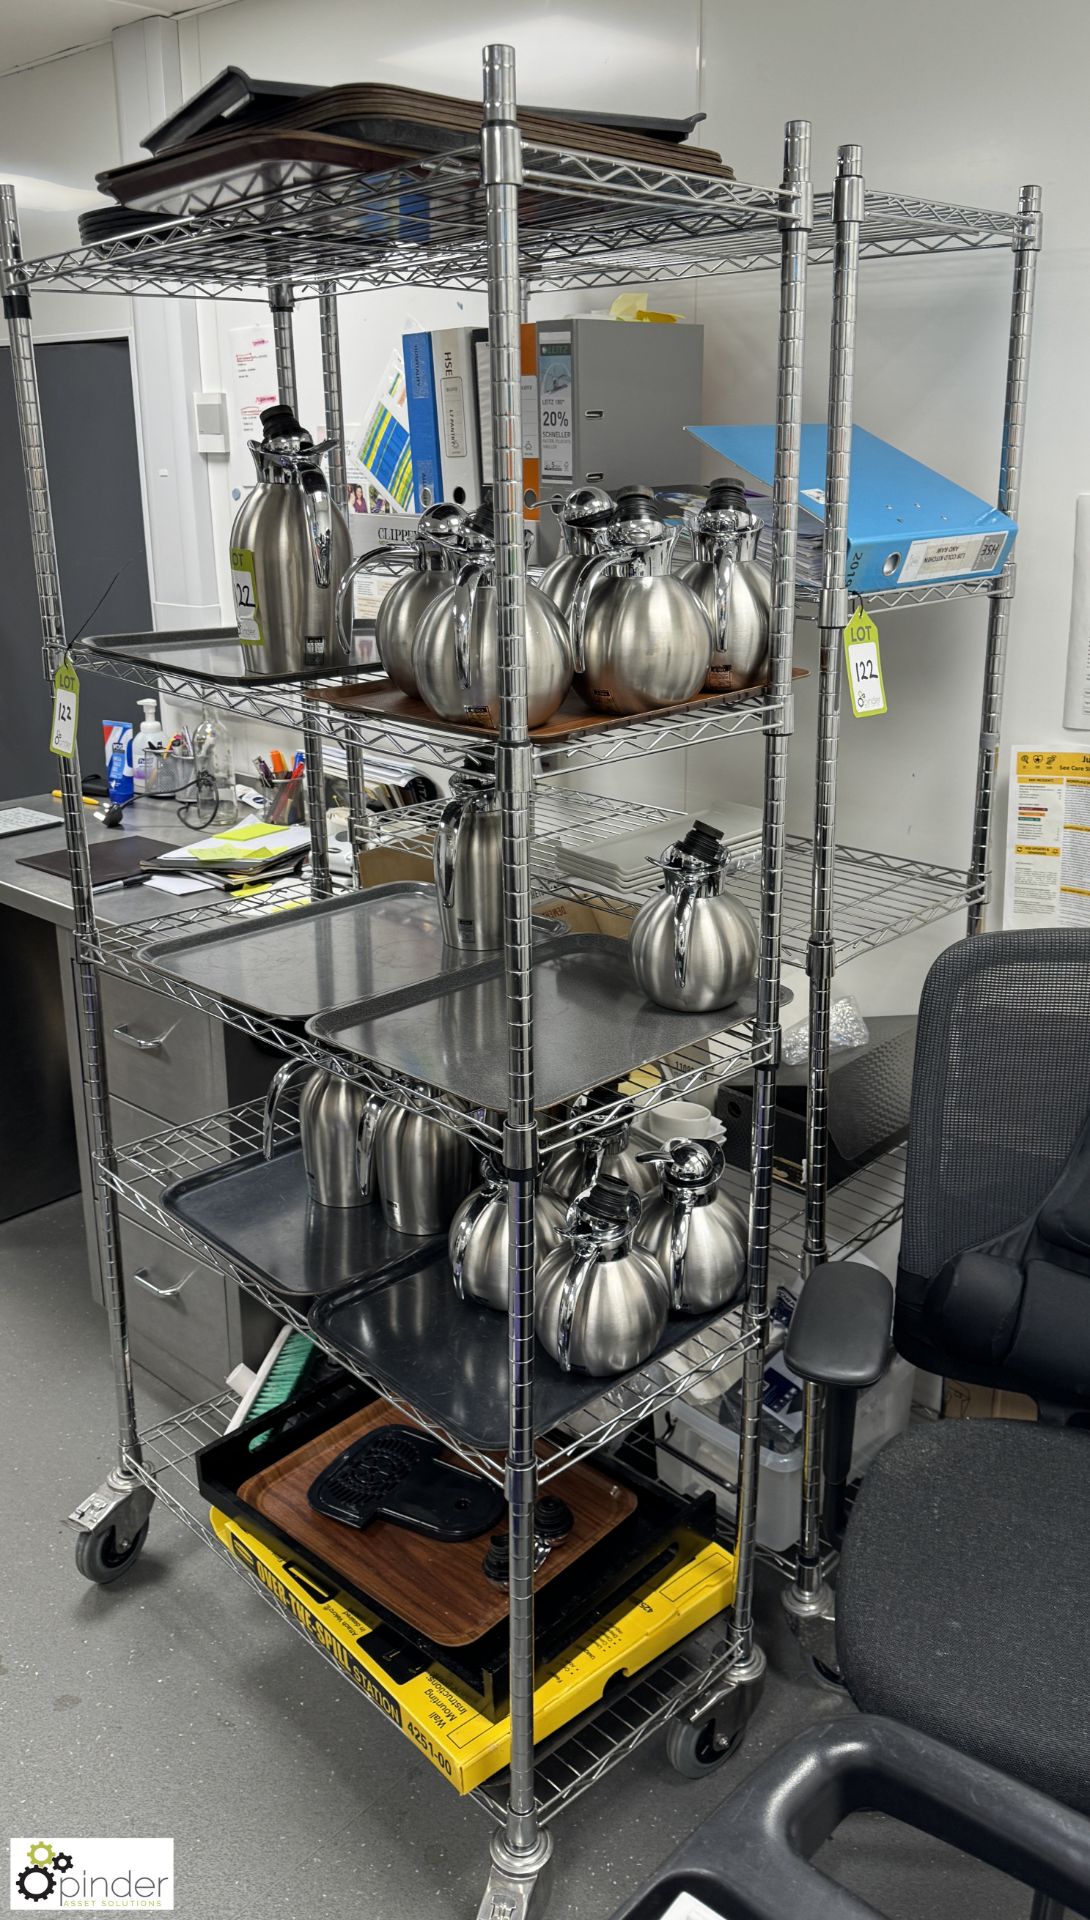 2 mobile wire Racks and Contents, including flasks, trays, etc (location in building - level 7) - Image 3 of 4